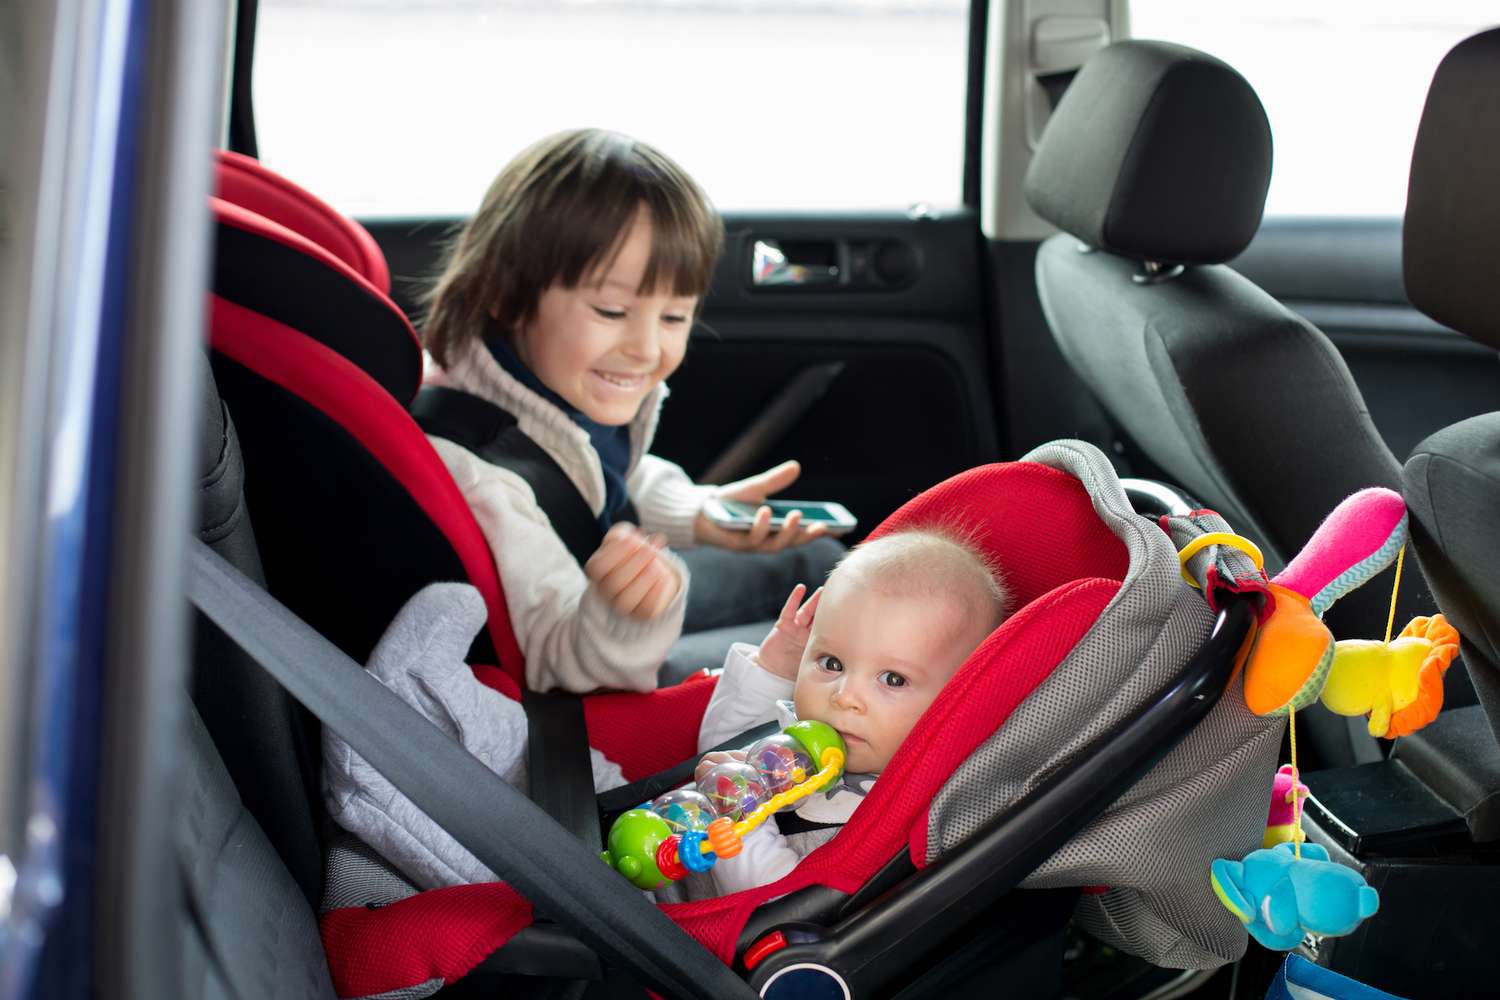 Car Seat For Your Child, What Type Of Car Seat Do I Need For A 3 Year Old